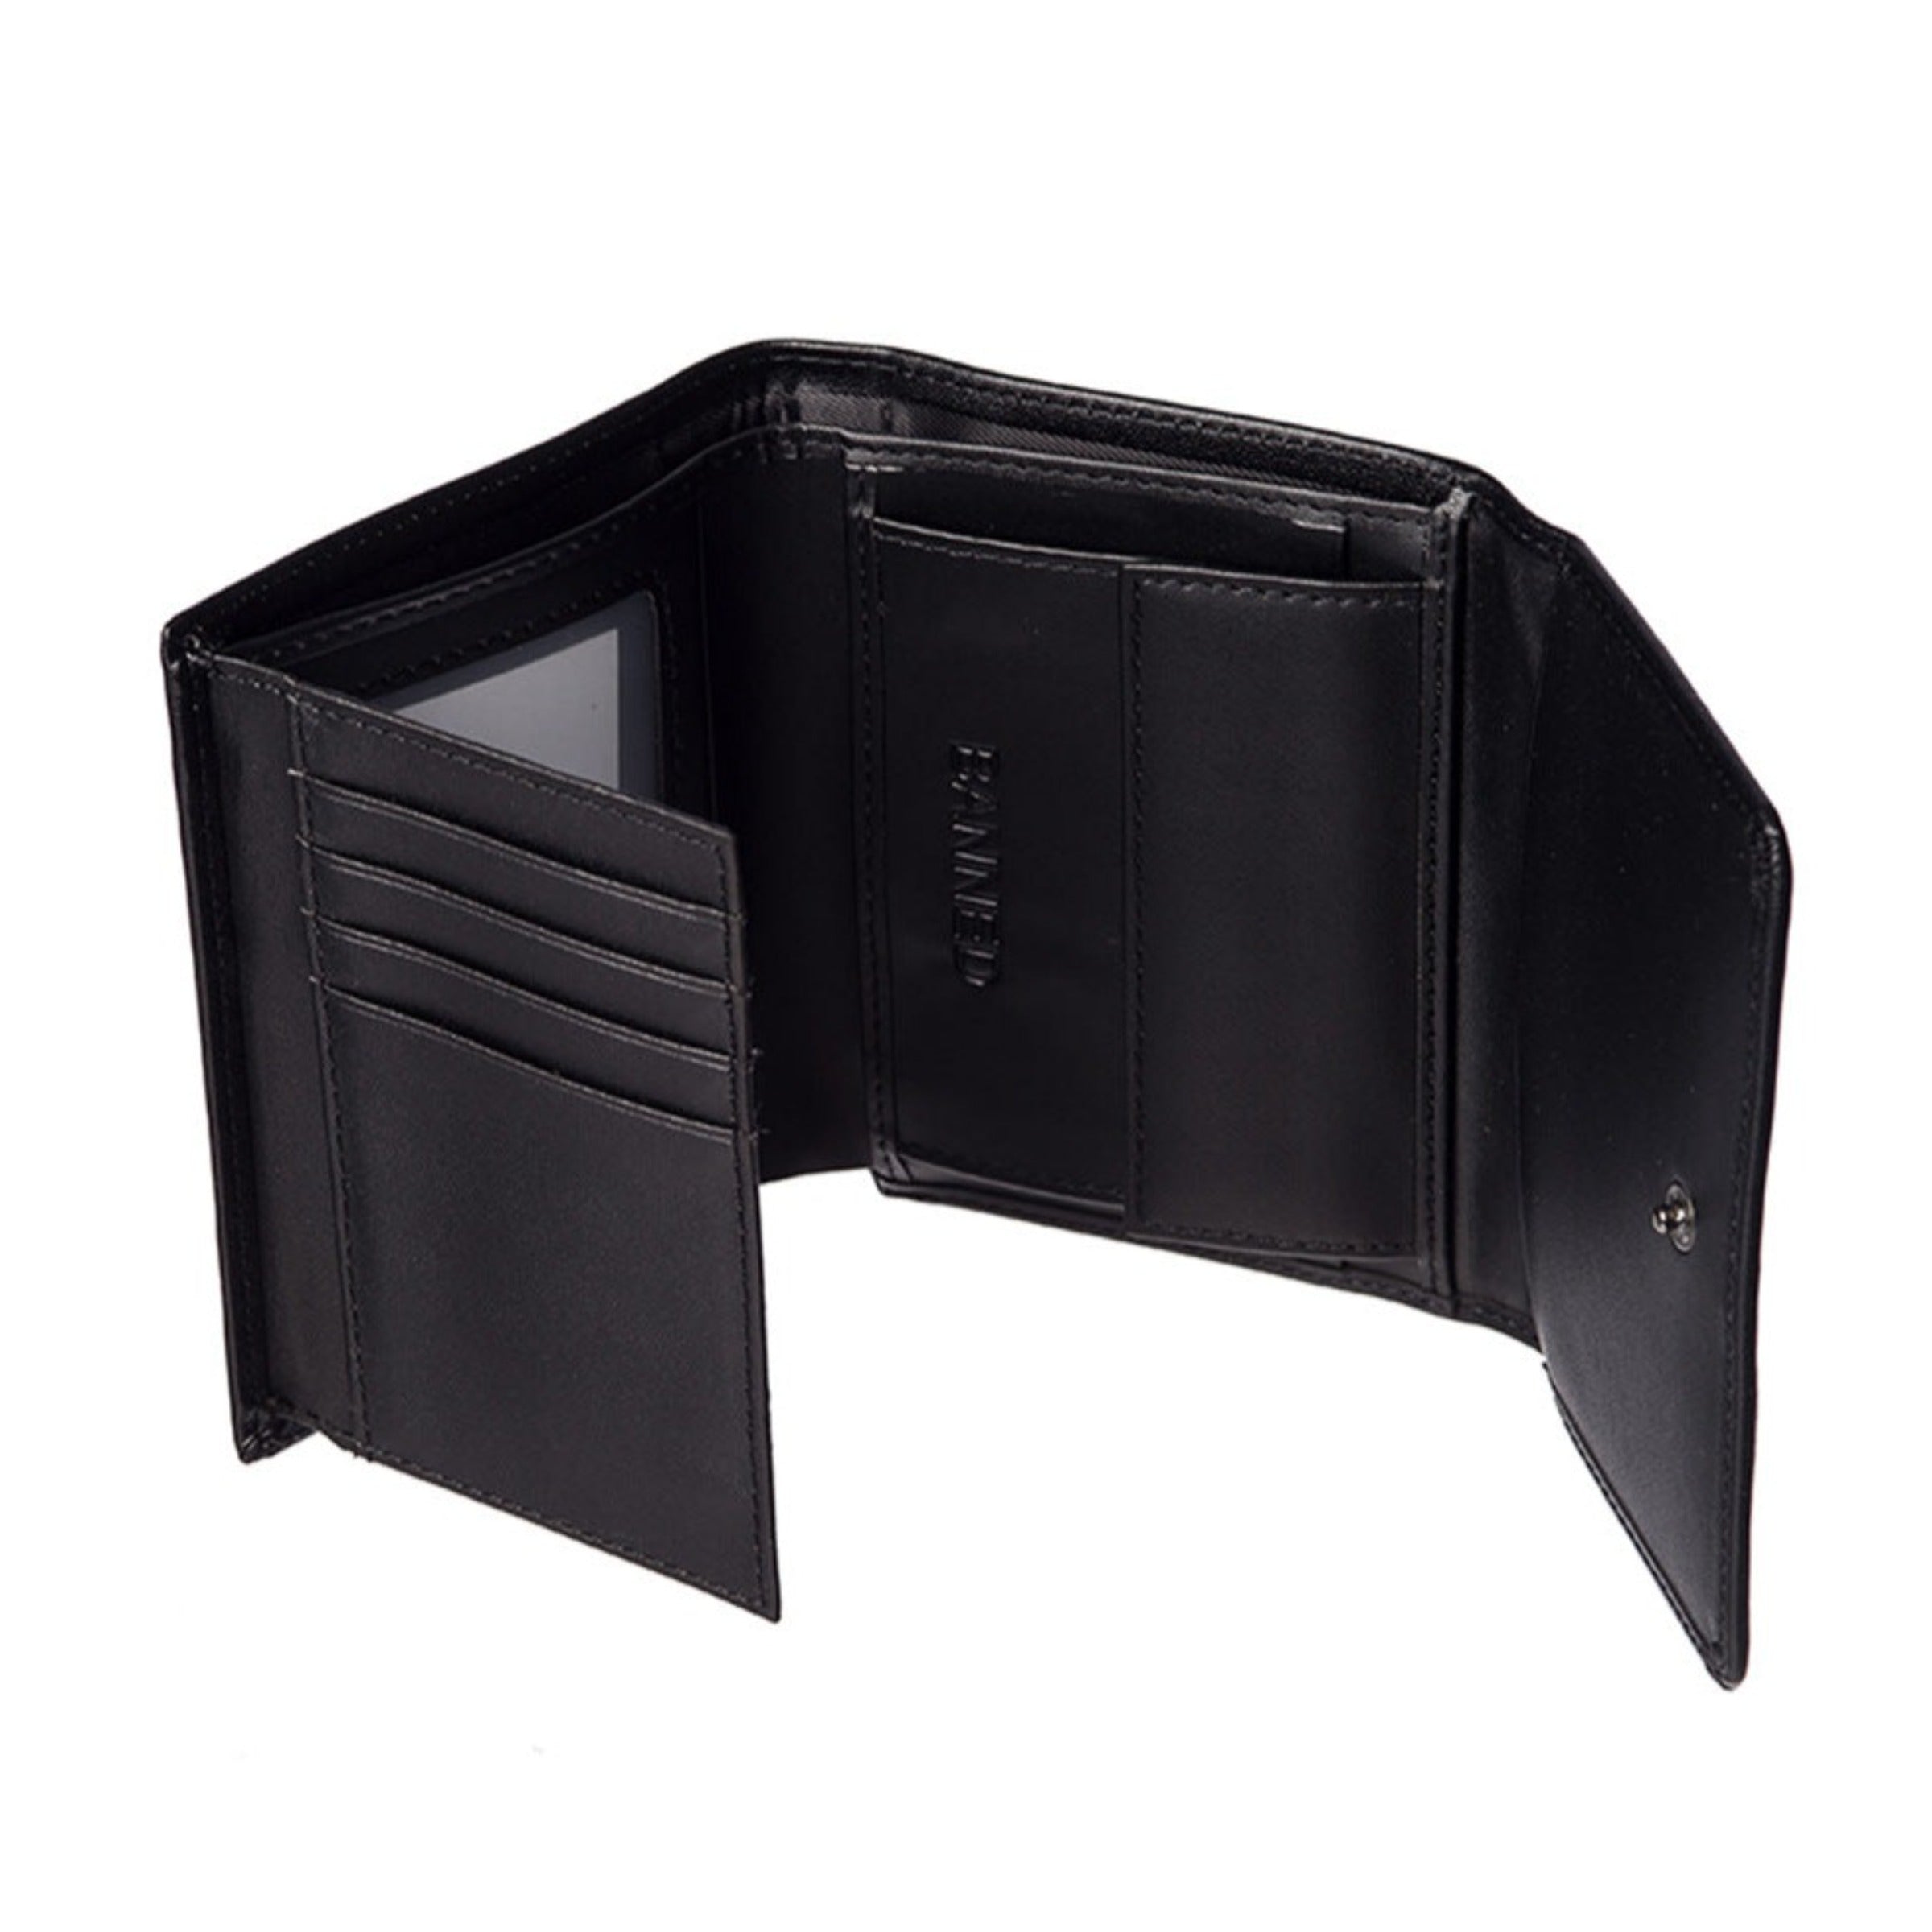 Ribcage Trifold Wallet Besom Boutique